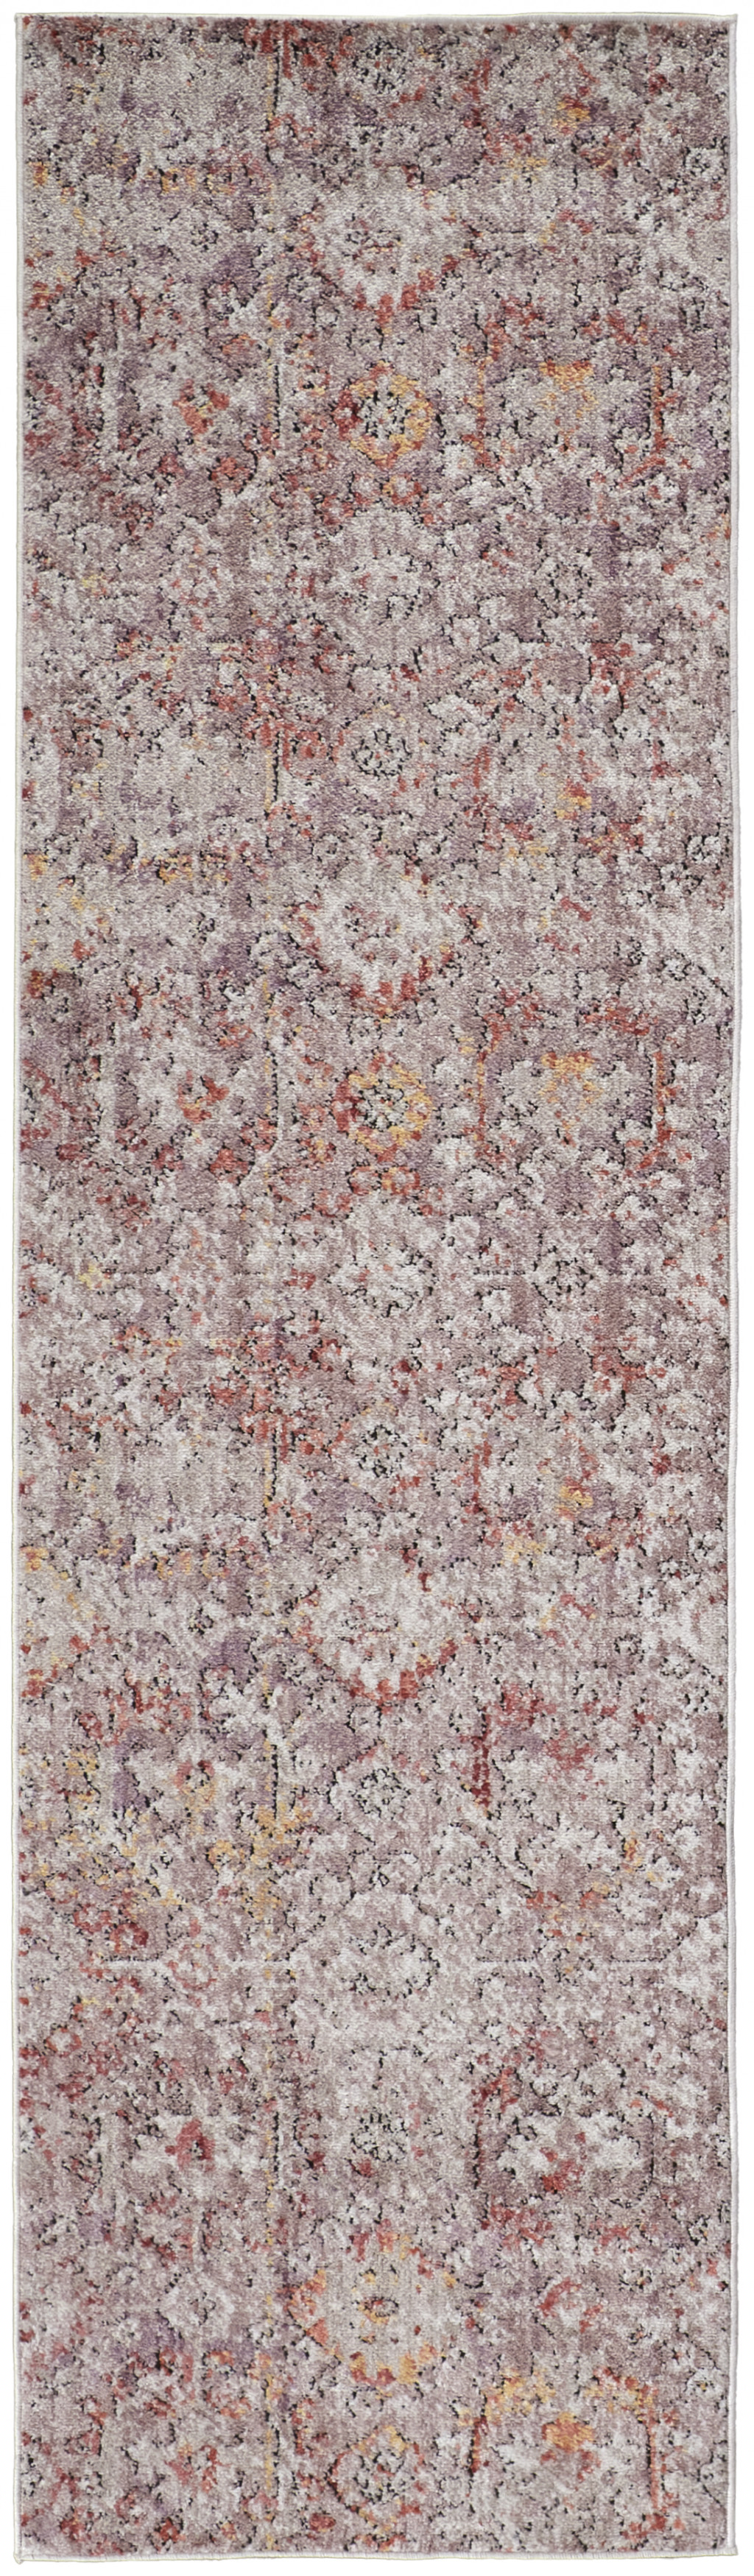 8' Pink Ivory And Gray Abstract Stain Resistant Runner Rug-512353-1